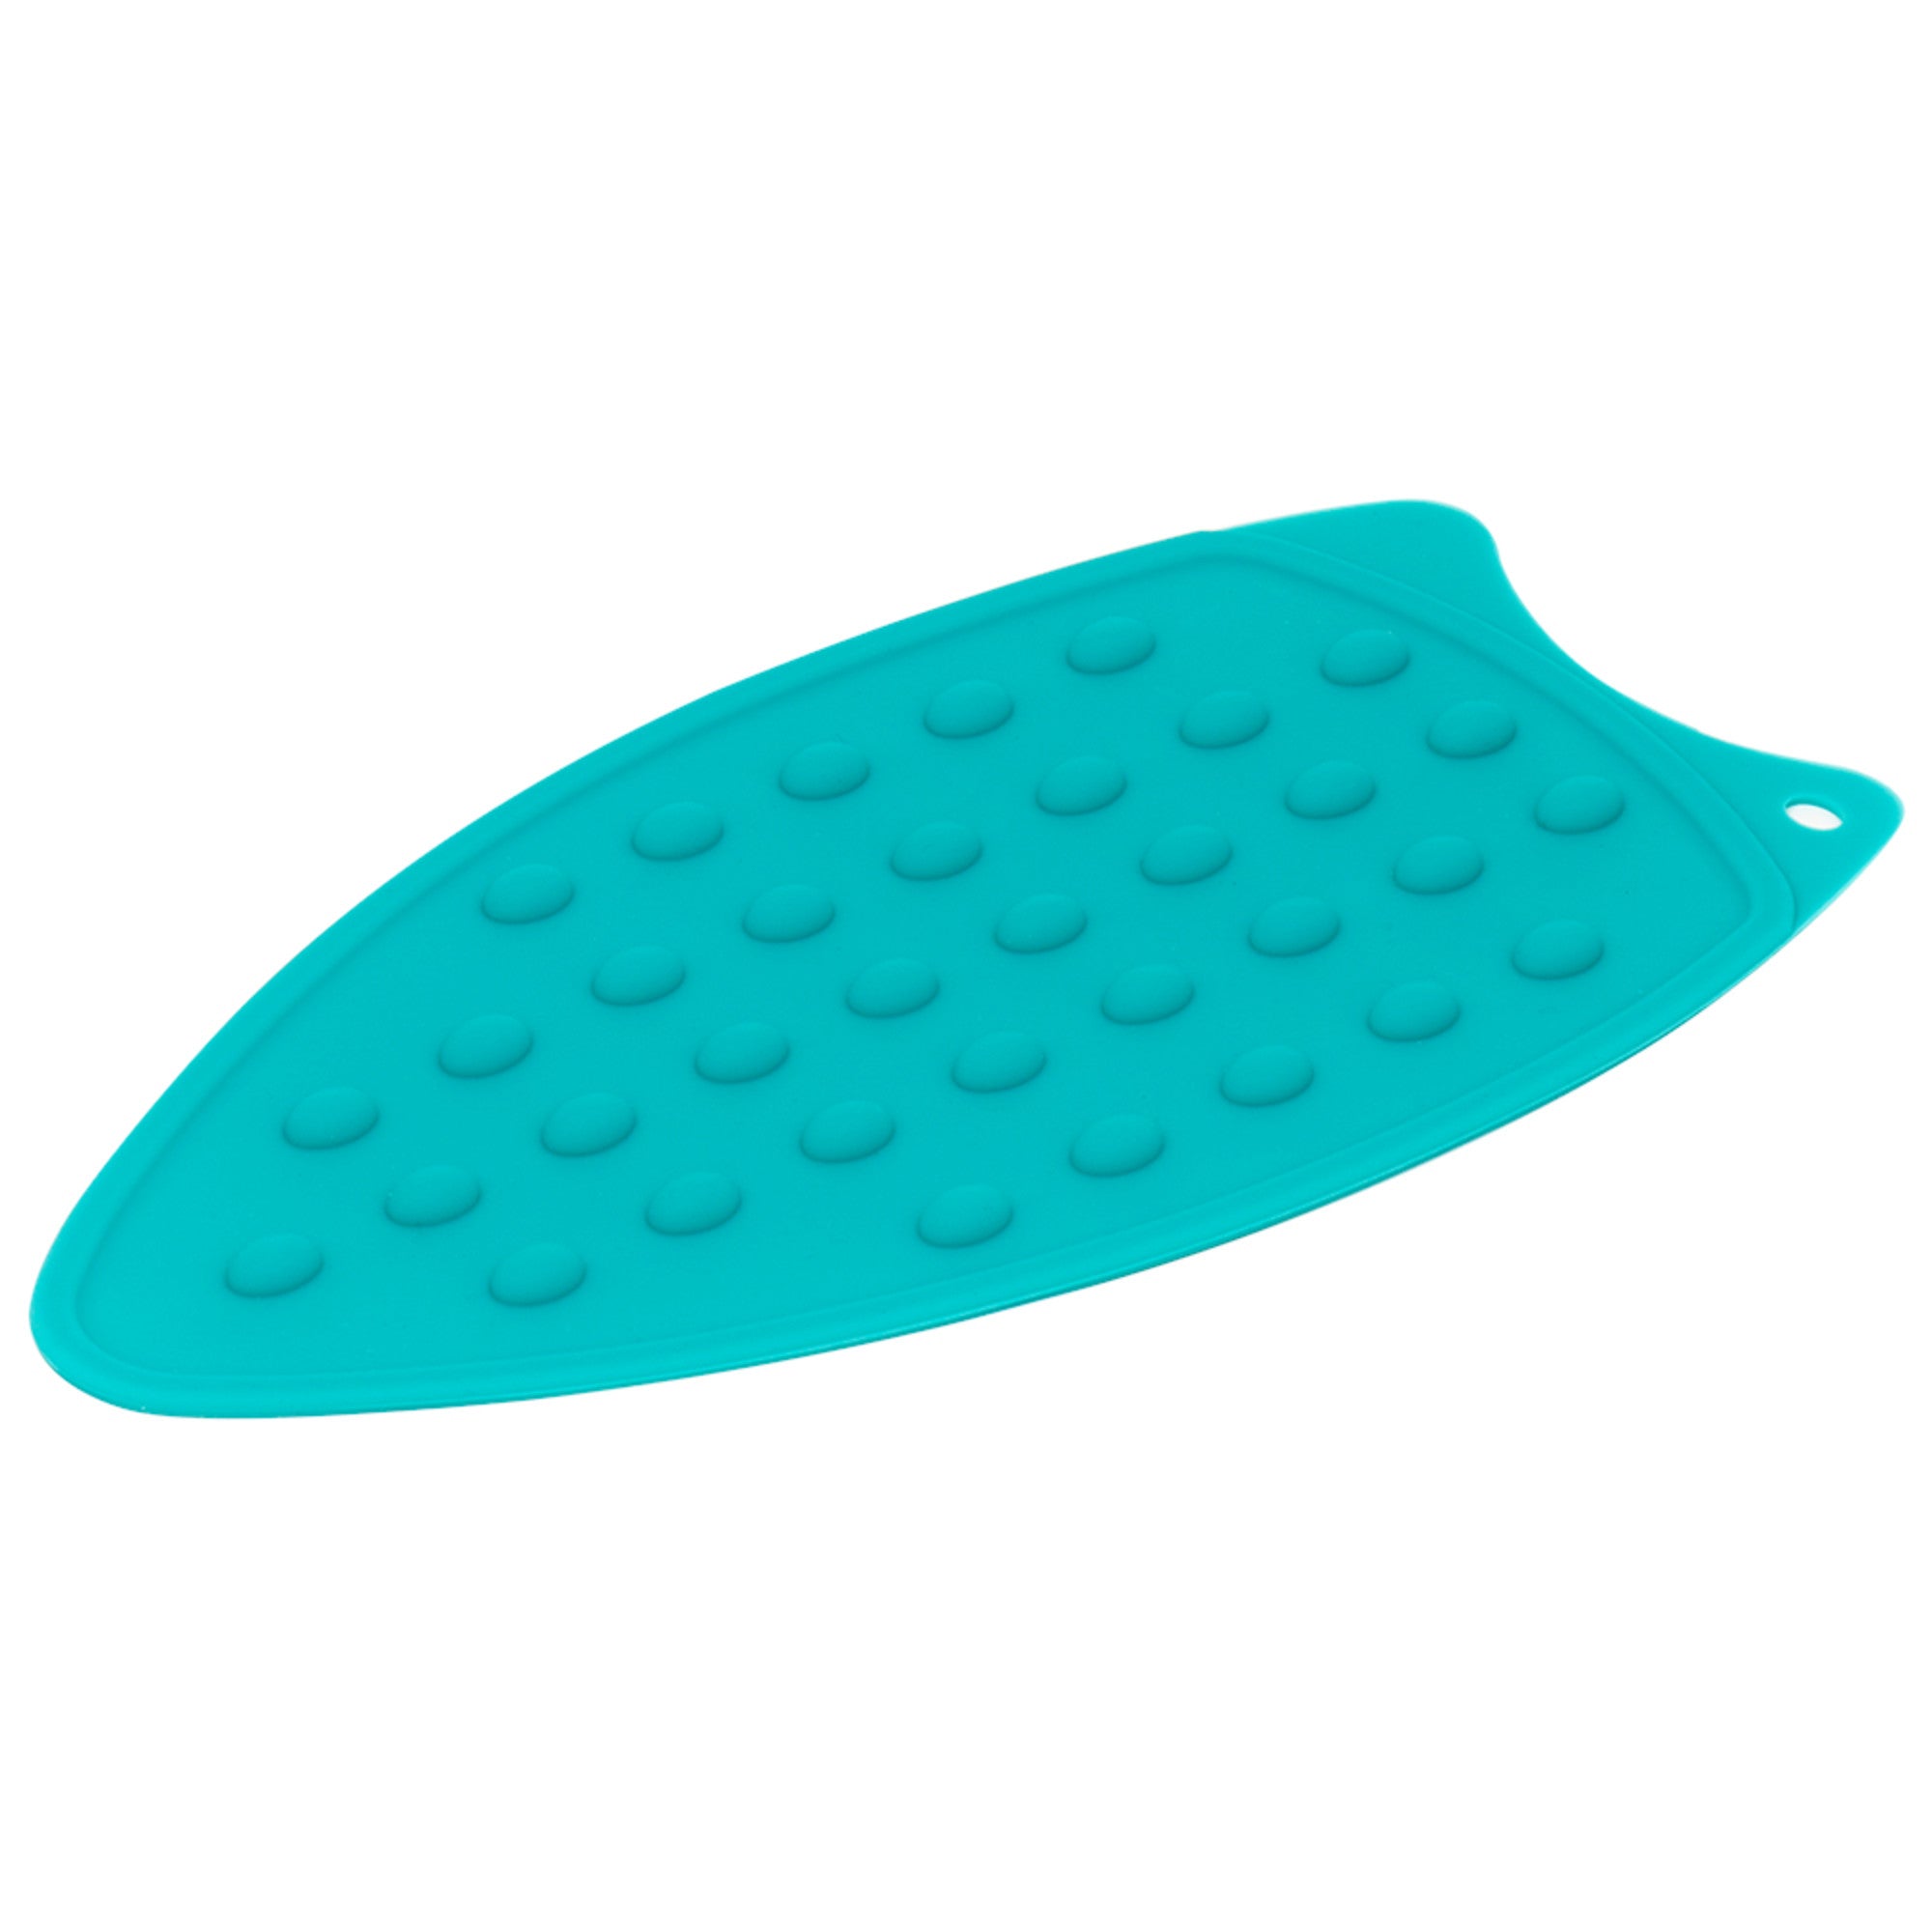 Home Basics Silicone Ironing Mat - Assorted Colors